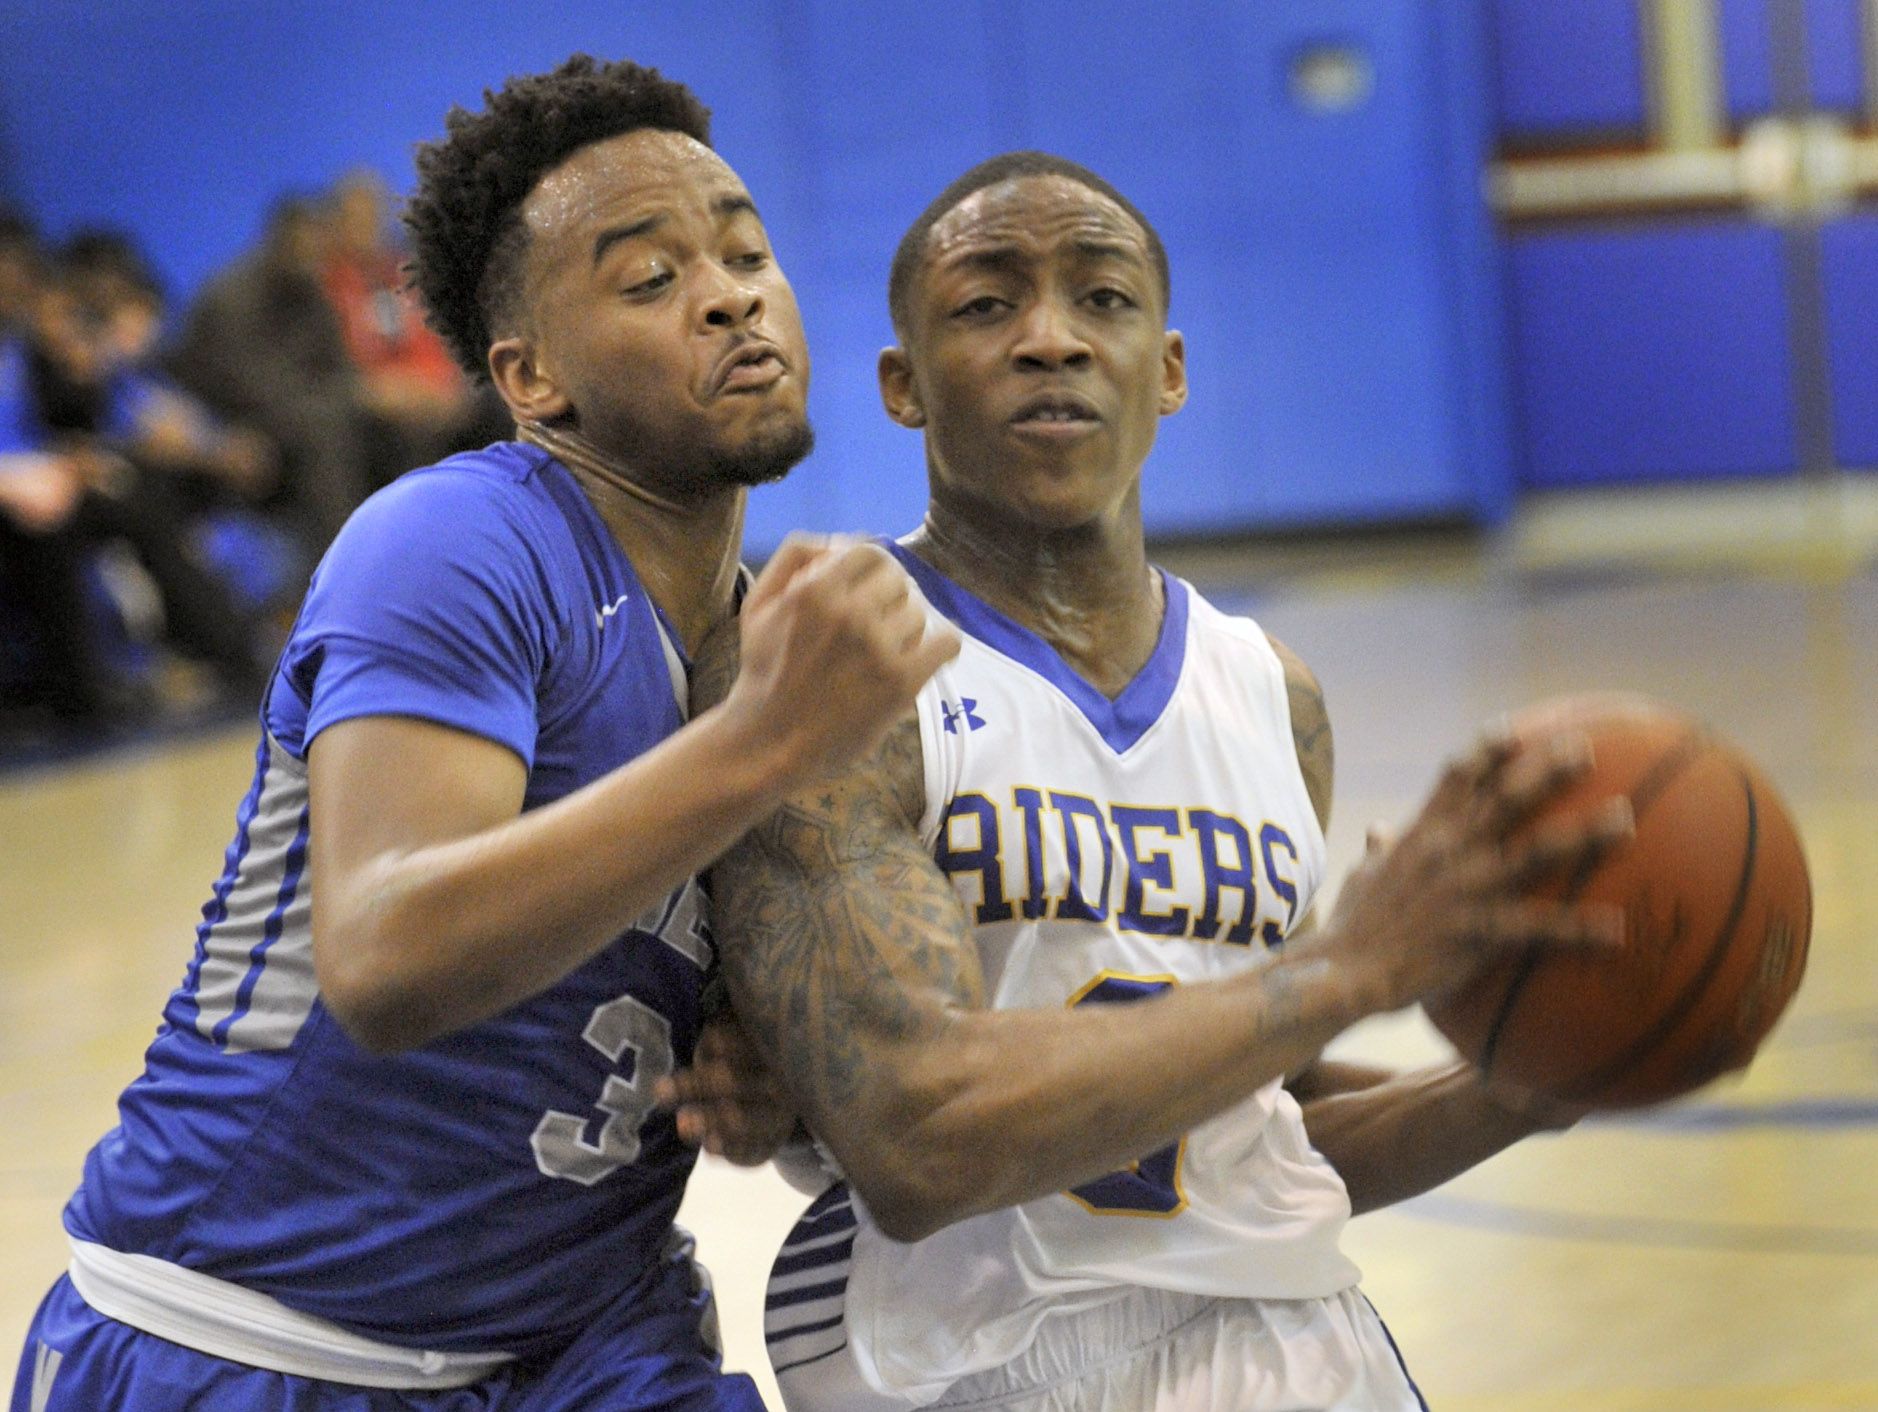 Davione Robinson of Caesar Rodney tries to go for a layup as he's defended by Woodbridge's Te'Vion Waters.